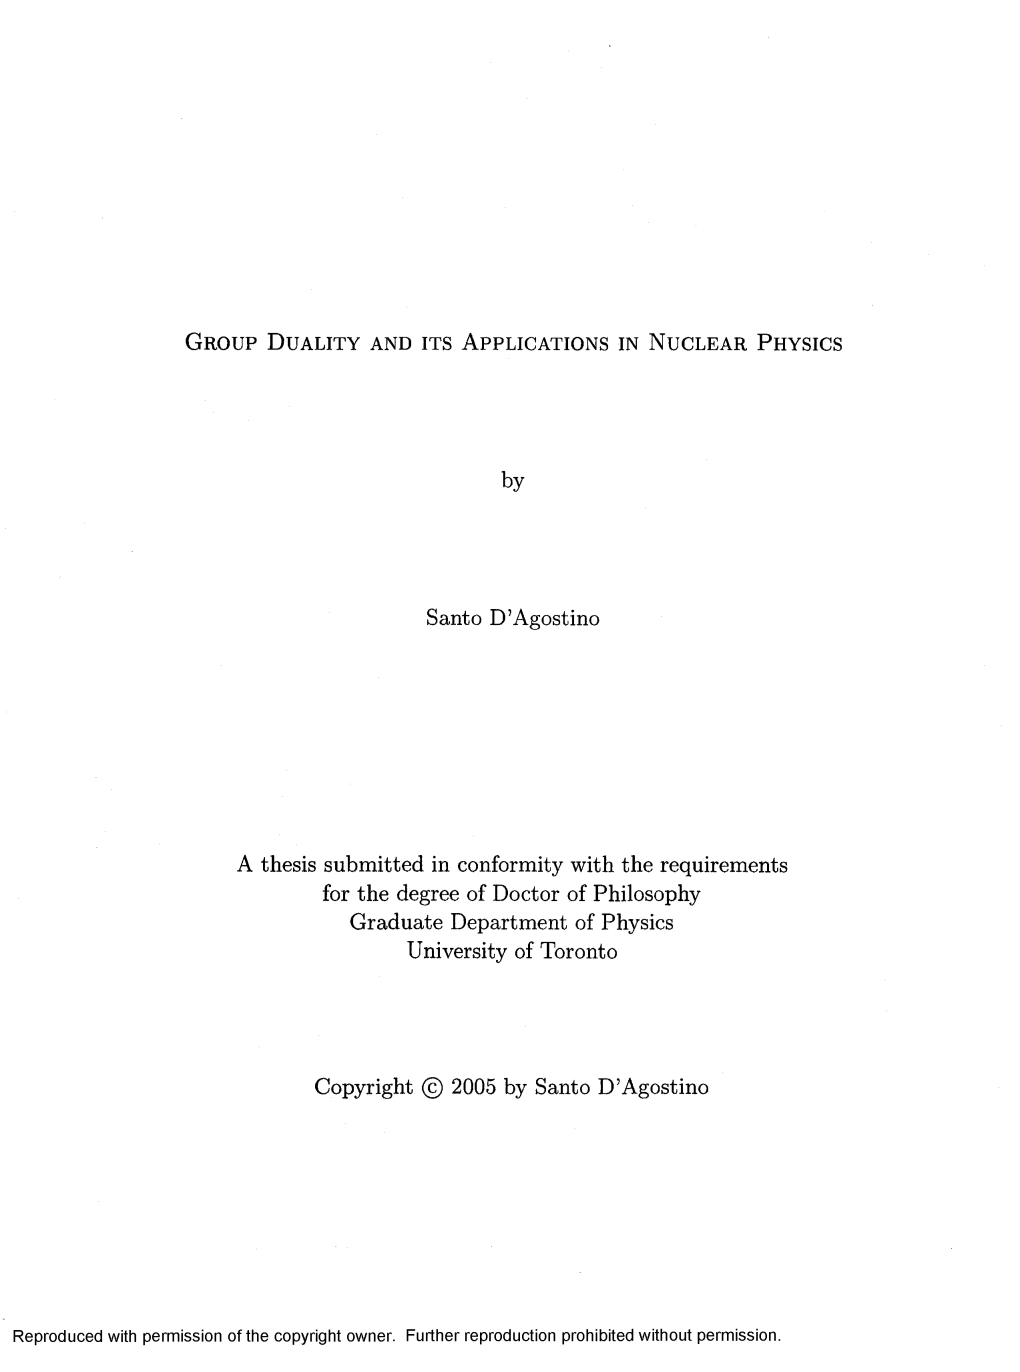 By Santo D'agostino a Thesis Submitted in Conformity with The